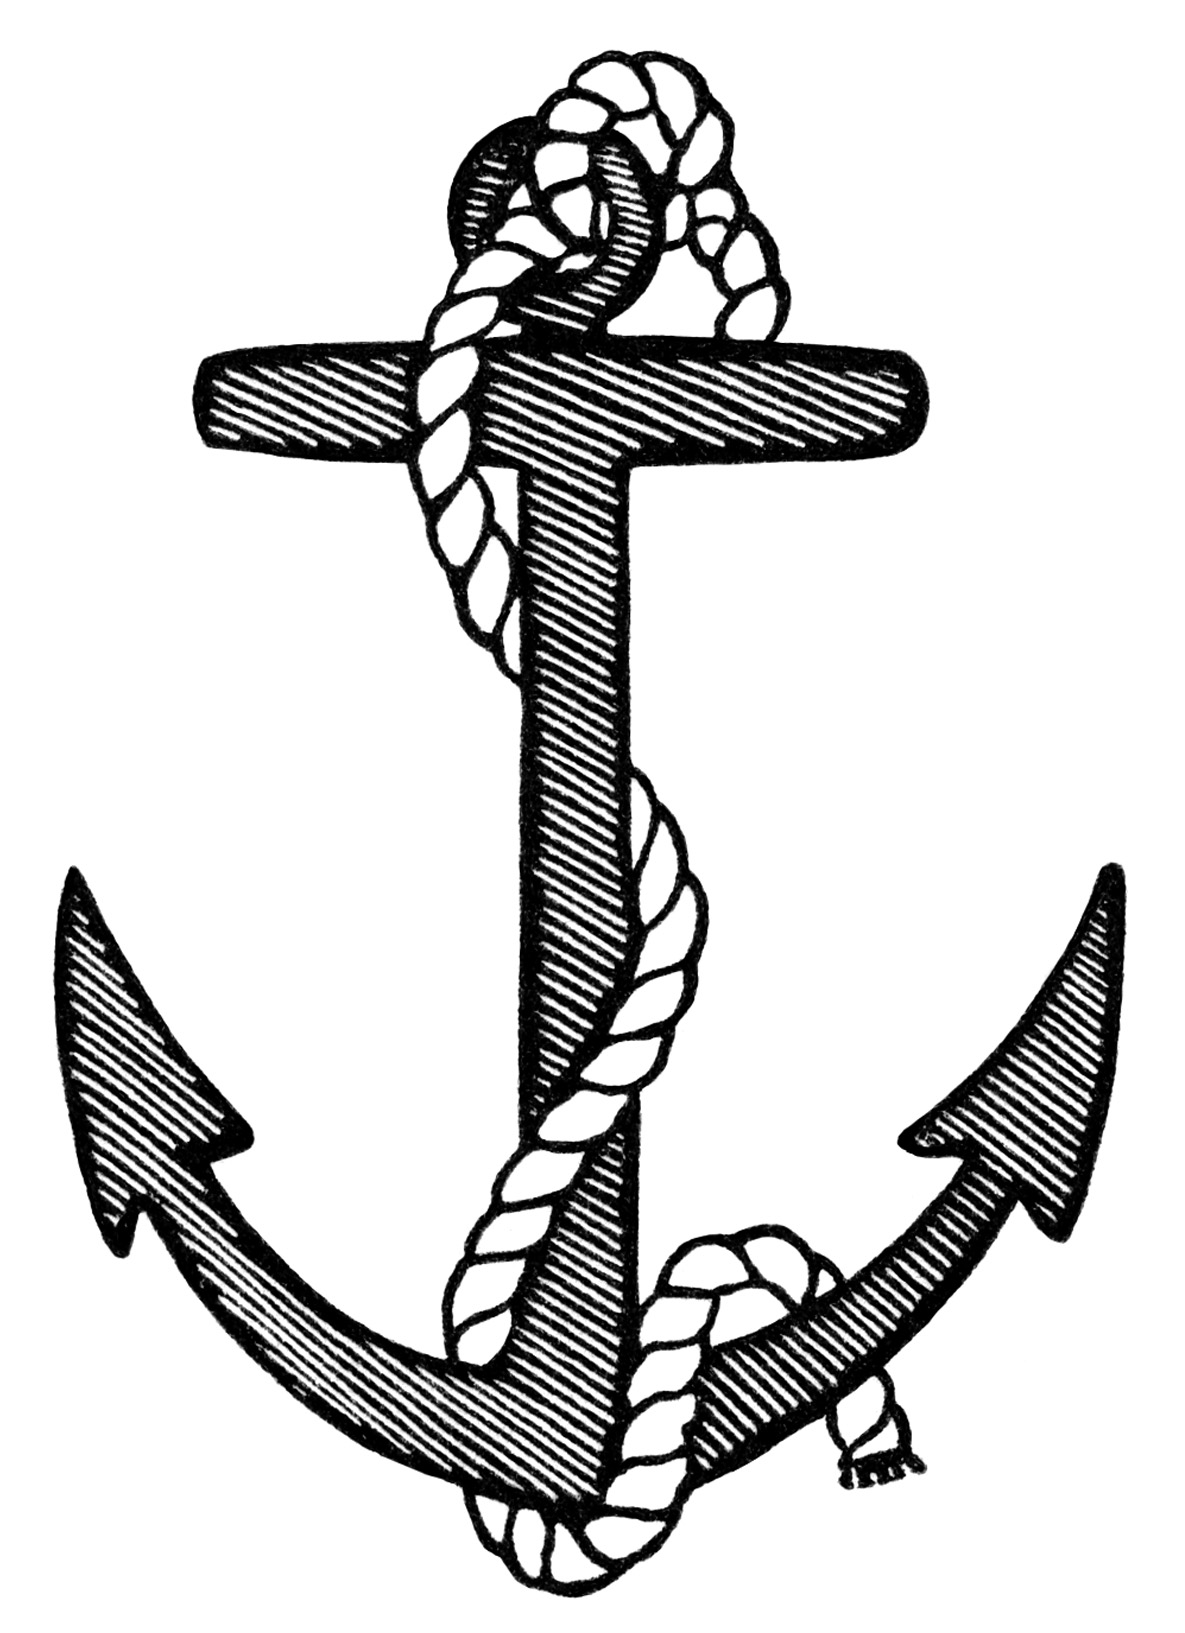 Anchor Clip Art Black And White Clipart Free Vintage Anchor Image